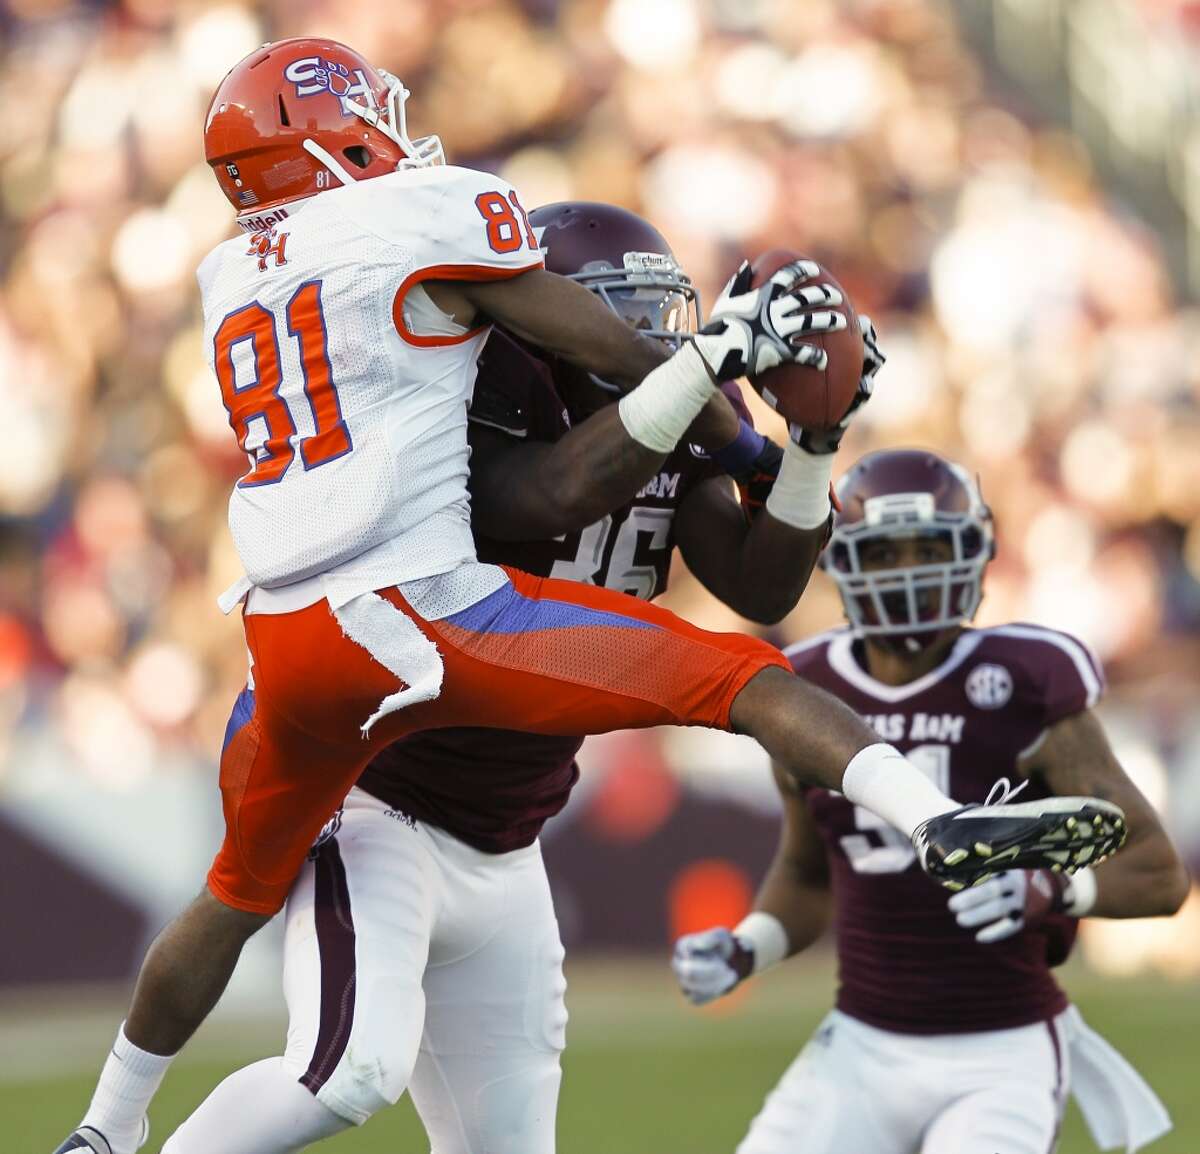 Donnie Baggs #36 of the Texas A&M Aggies intercepts a pass intended for Chance Nelson #81 of the Sam Houston State Bearkats at Kyle Field on November 17, 2012 in College Station, Texas. (Bob Levey / Getty Images)